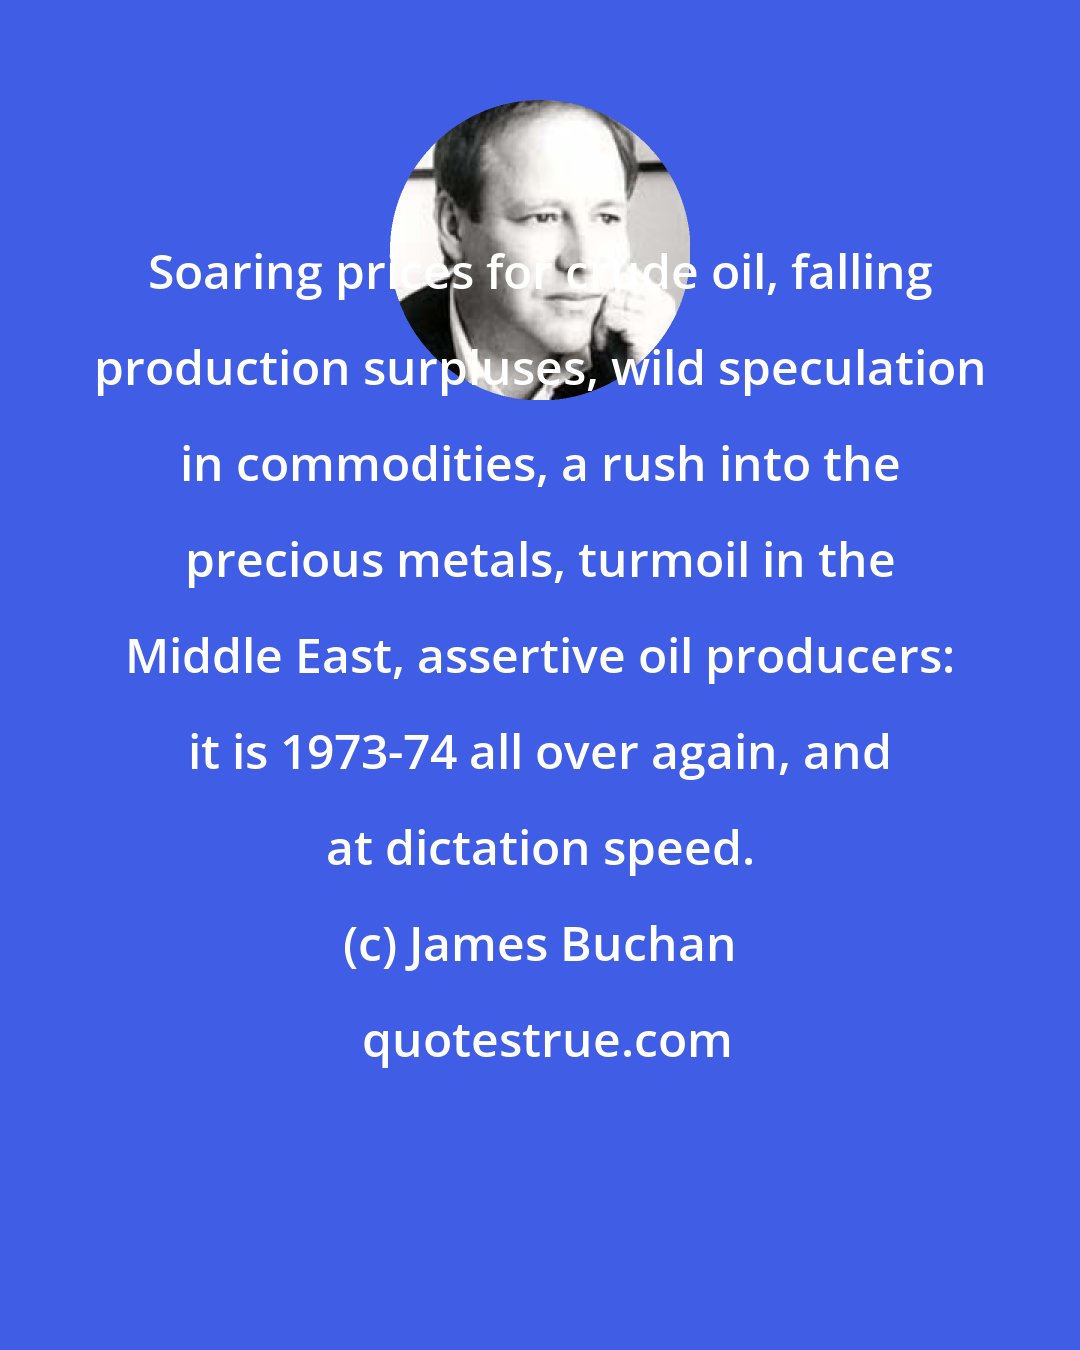 James Buchan: Soaring prices for crude oil, falling production surpluses, wild speculation in commodities, a rush into the precious metals, turmoil in the Middle East, assertive oil producers: it is 1973-74 all over again, and at dictation speed.